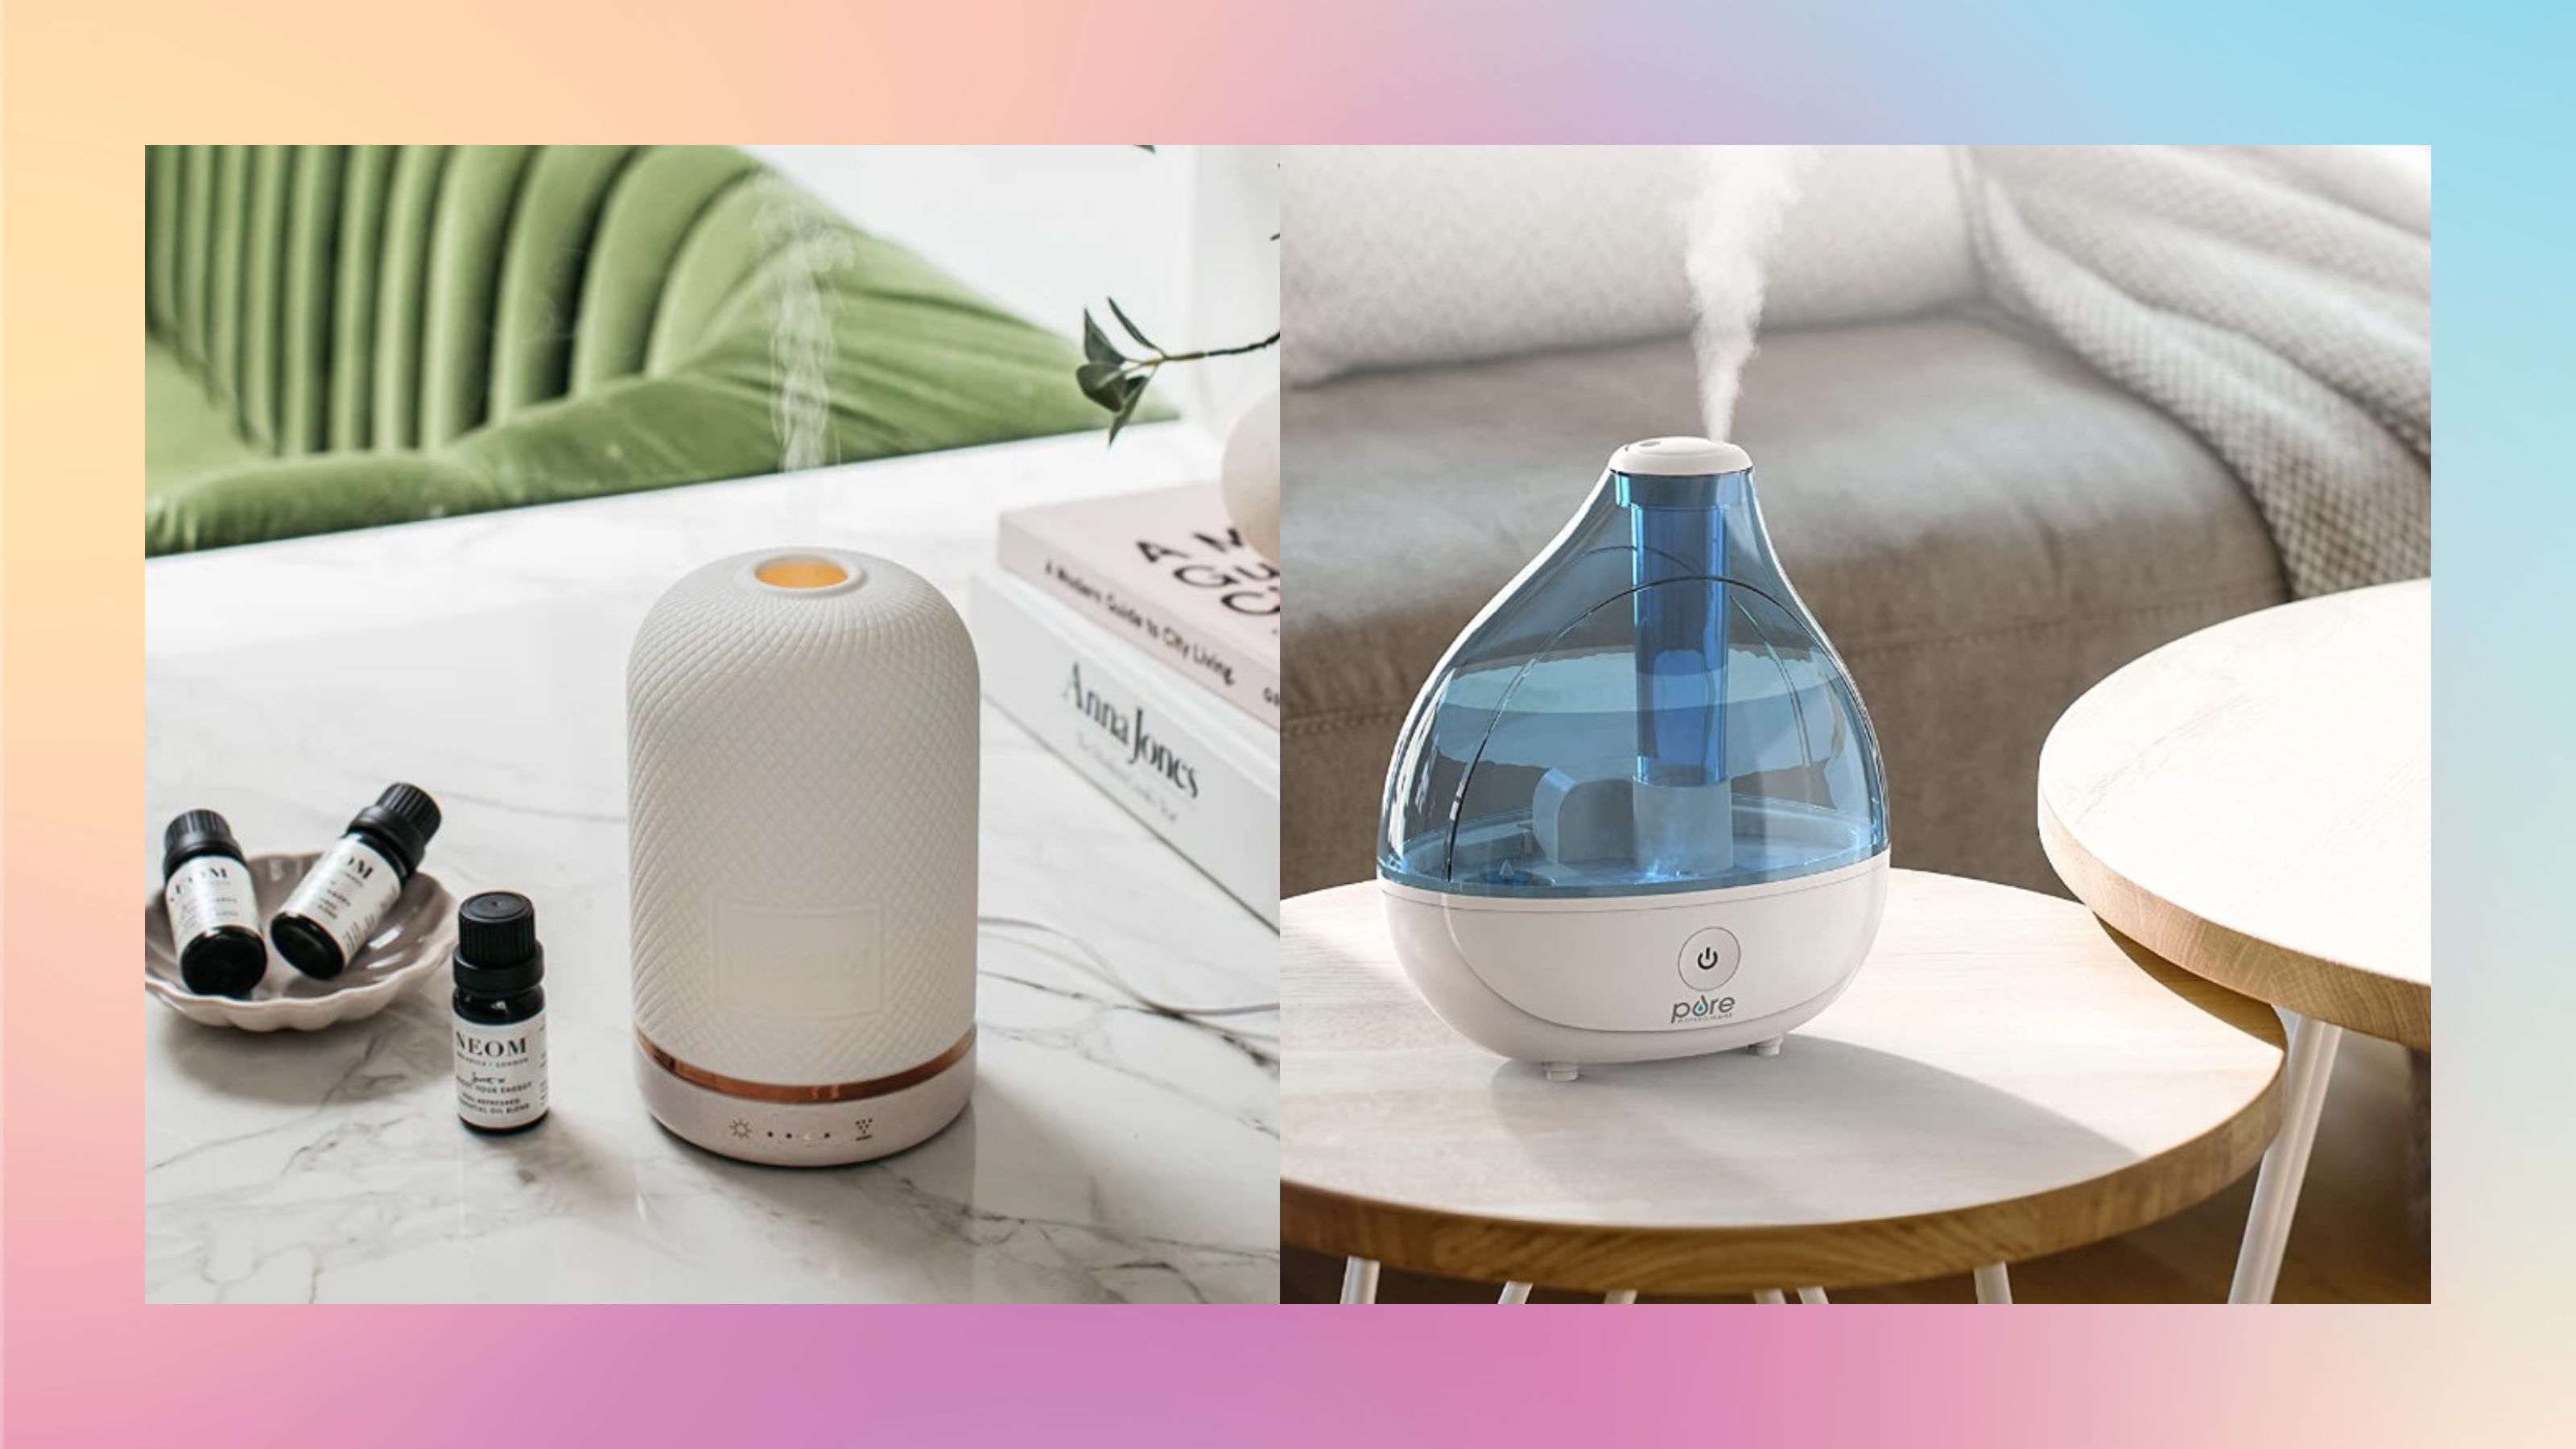 Humidifier vs Diffuser  Differences Between Humidifier & Diffuser